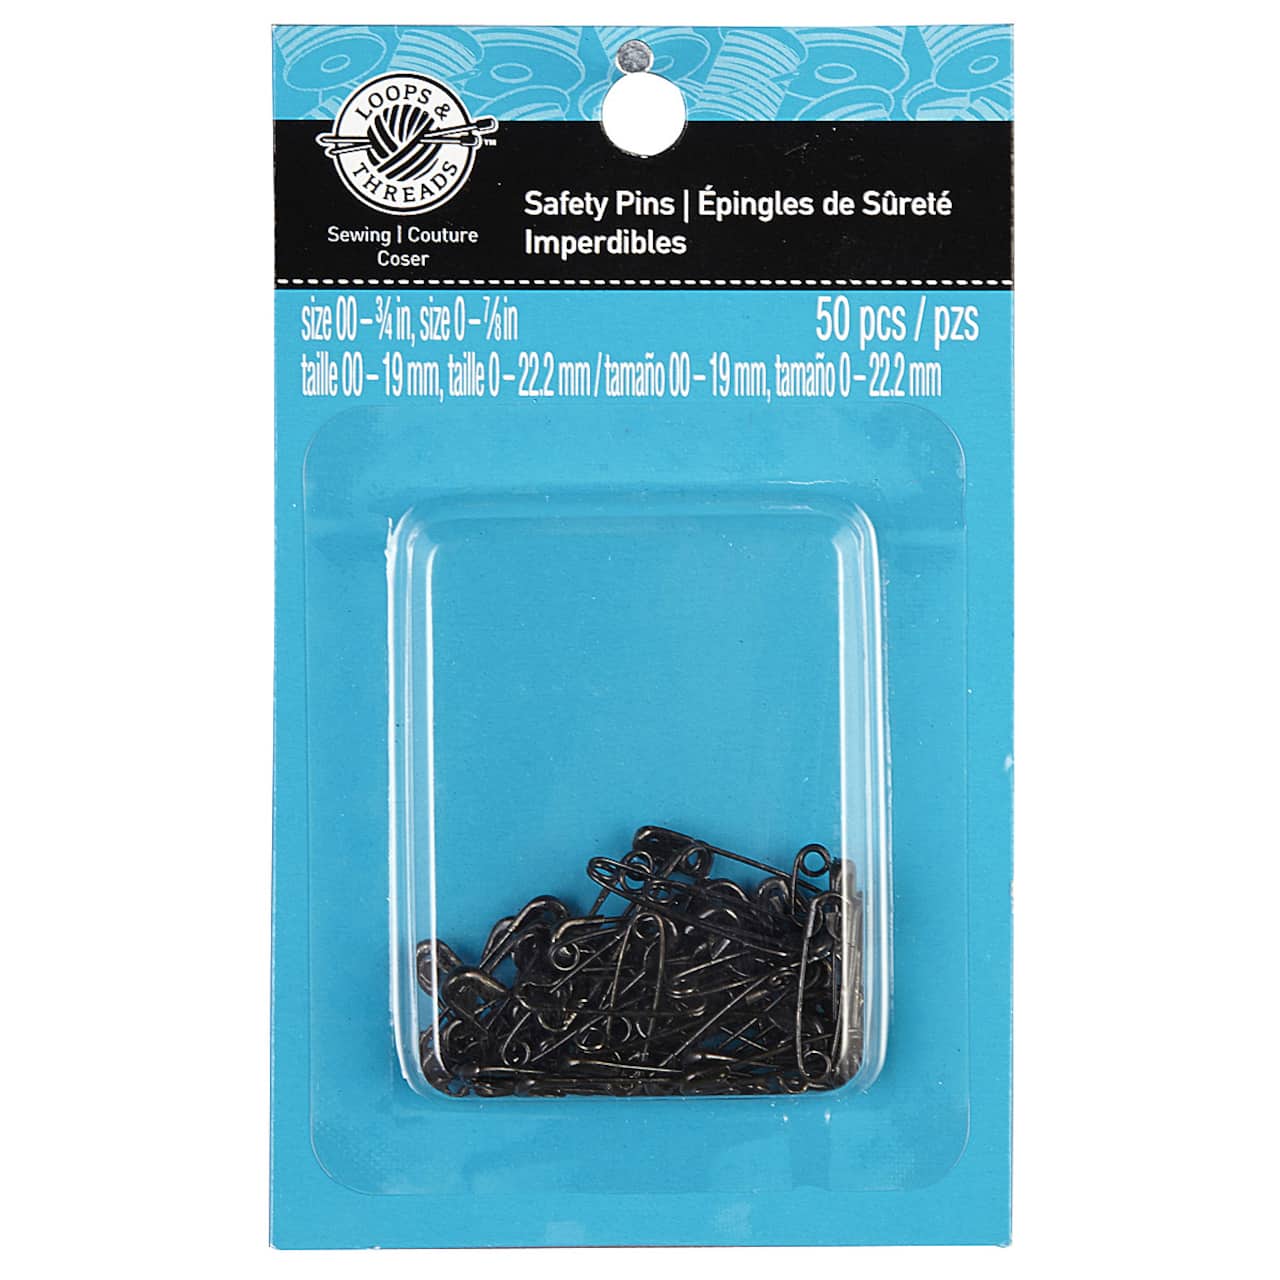 12 Packs: 50 ct. (600 total) Black Safety Pins by Loops & Threads